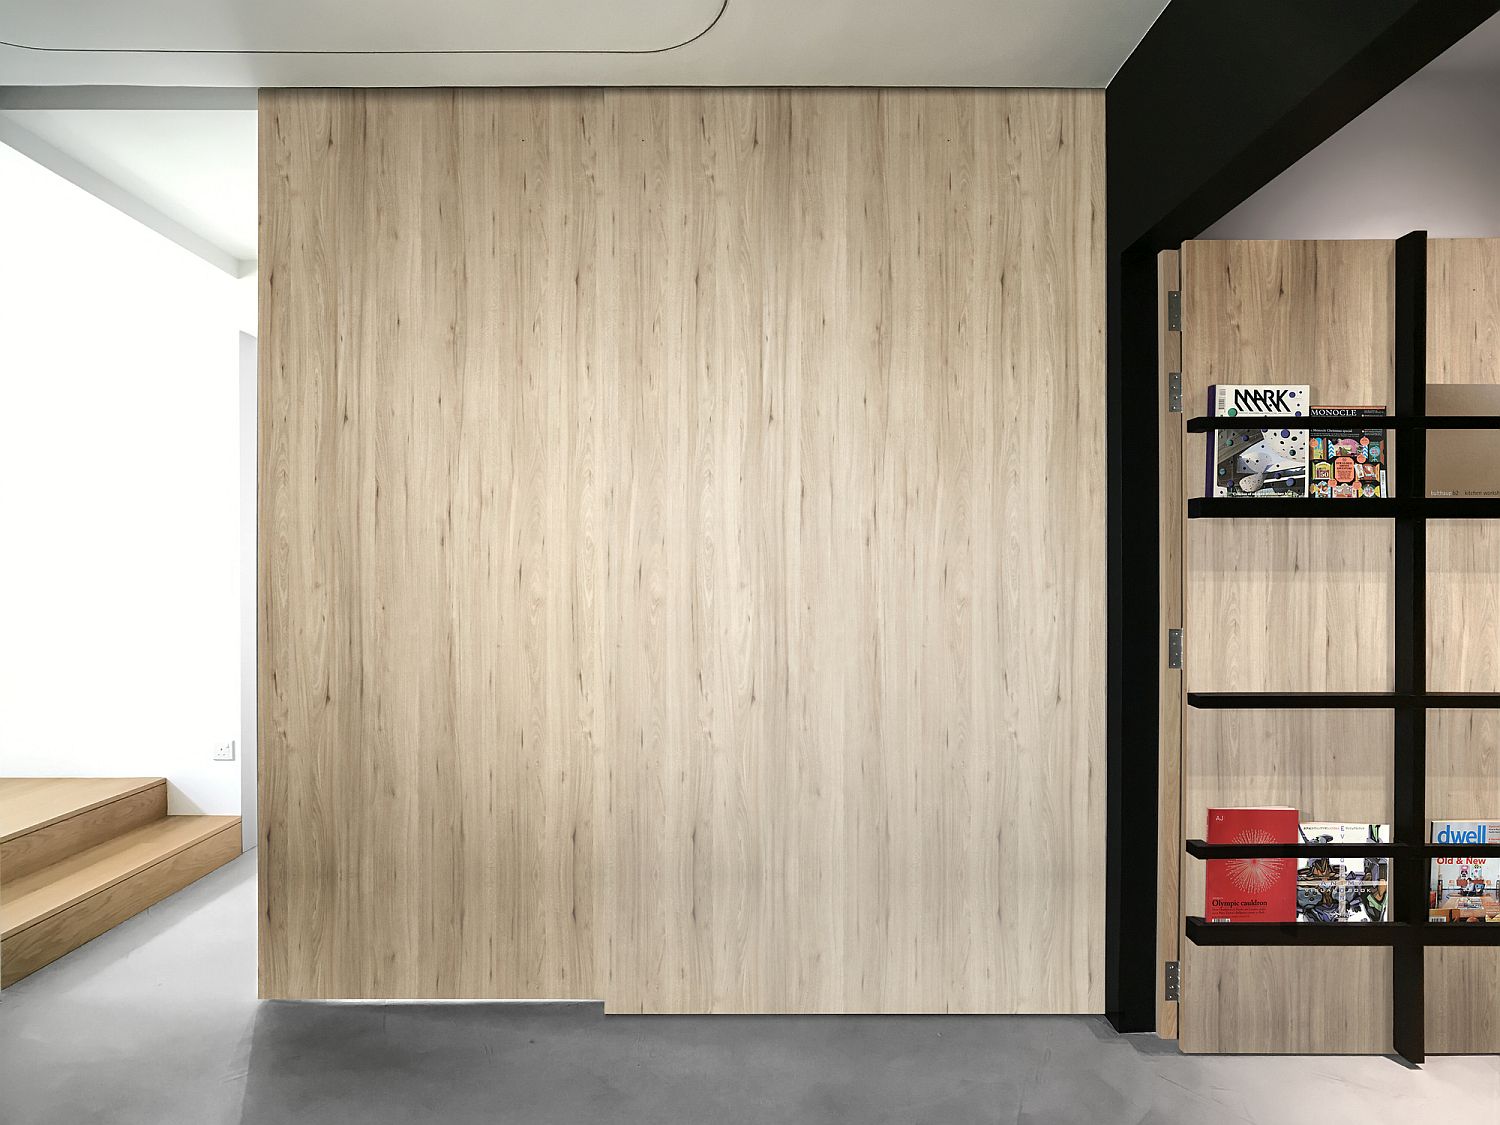 Sliding-partitions-and-walls-help-shape-a-felxible-and-multi-tasking-apartment